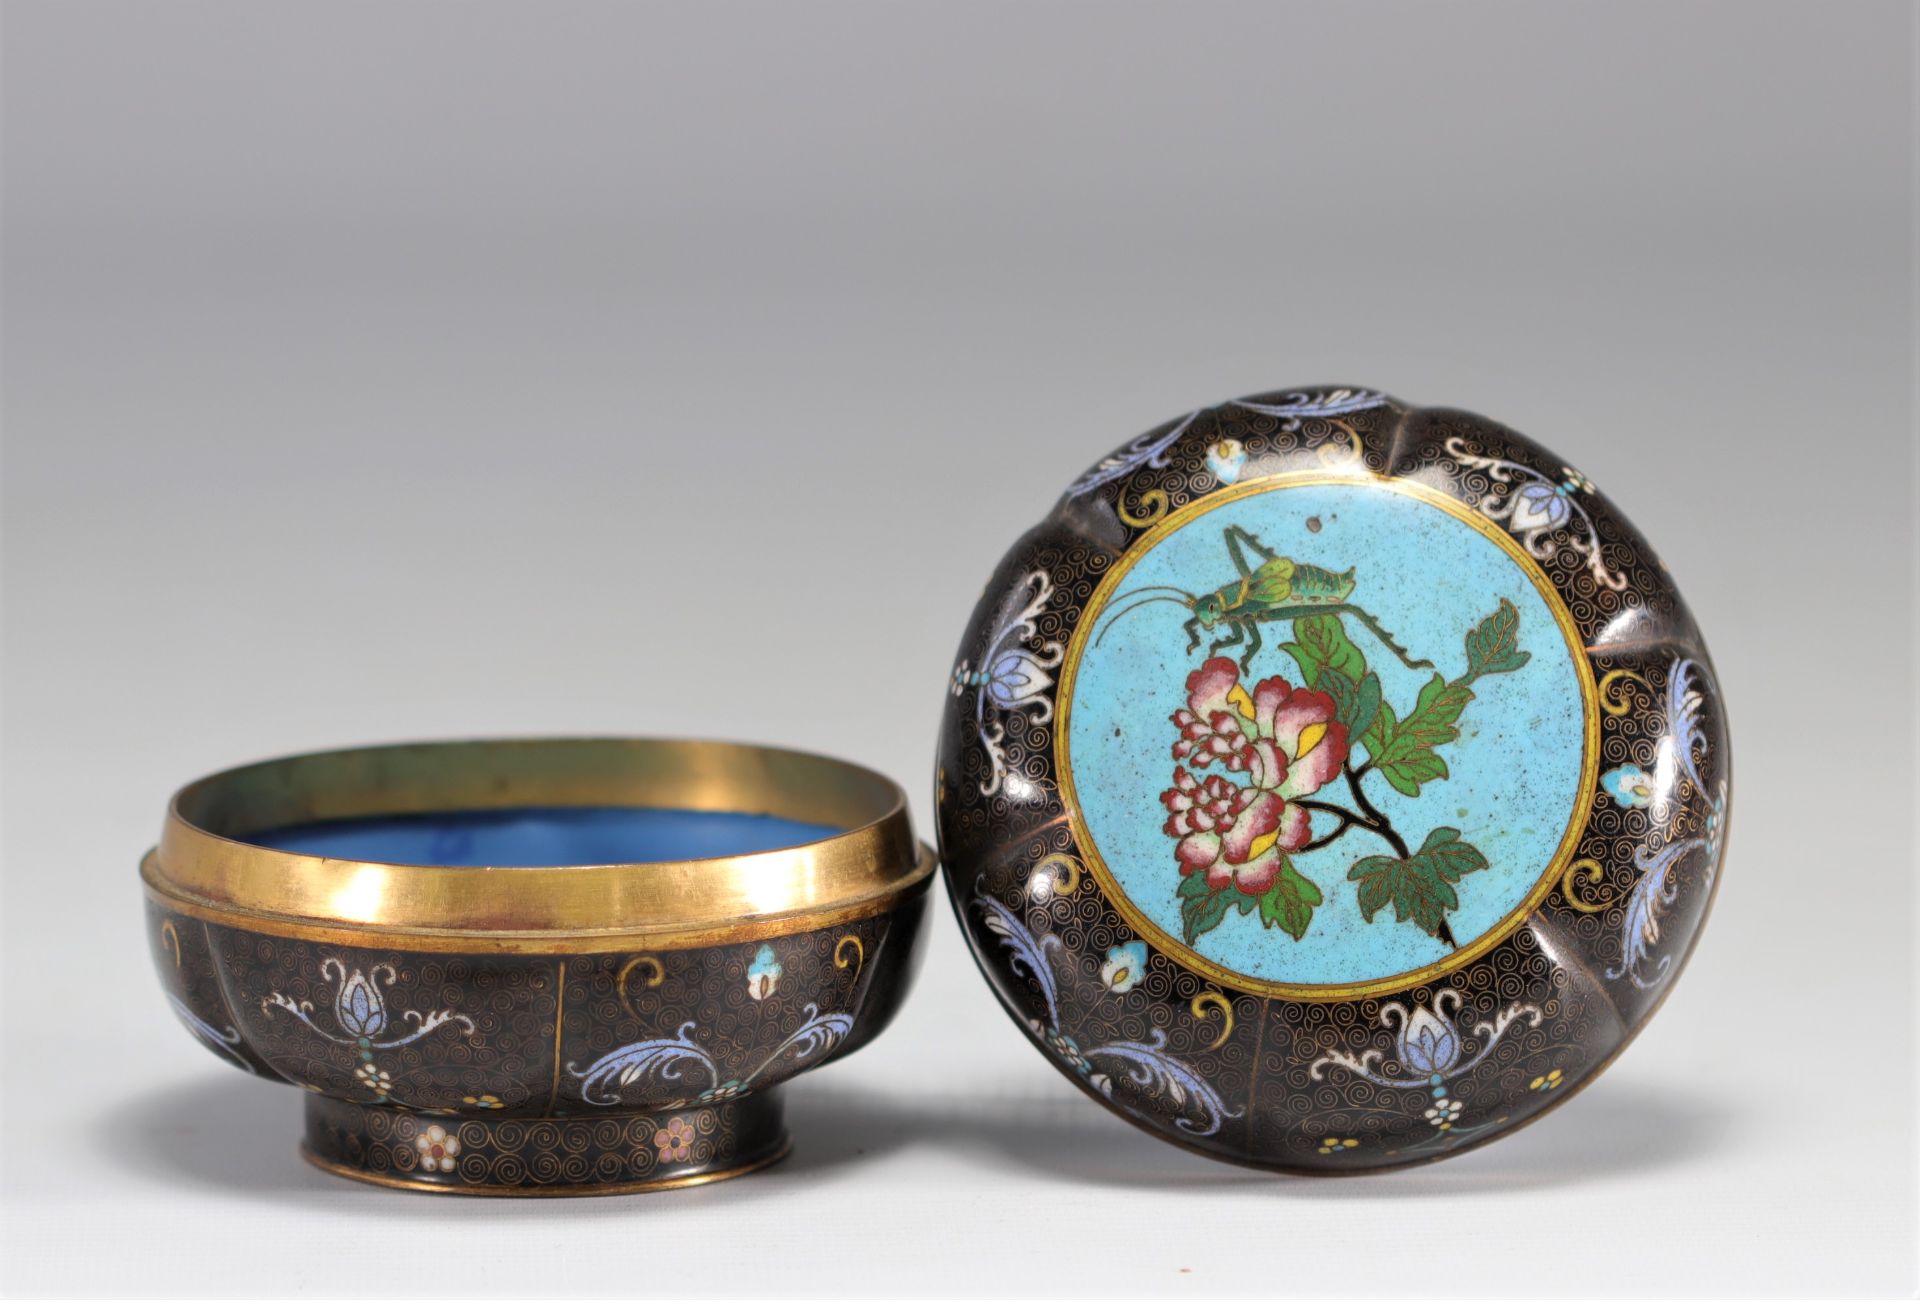 A beautiful cloisonne enamel box decorated with a cricket on a flower from the 19th century from Mei